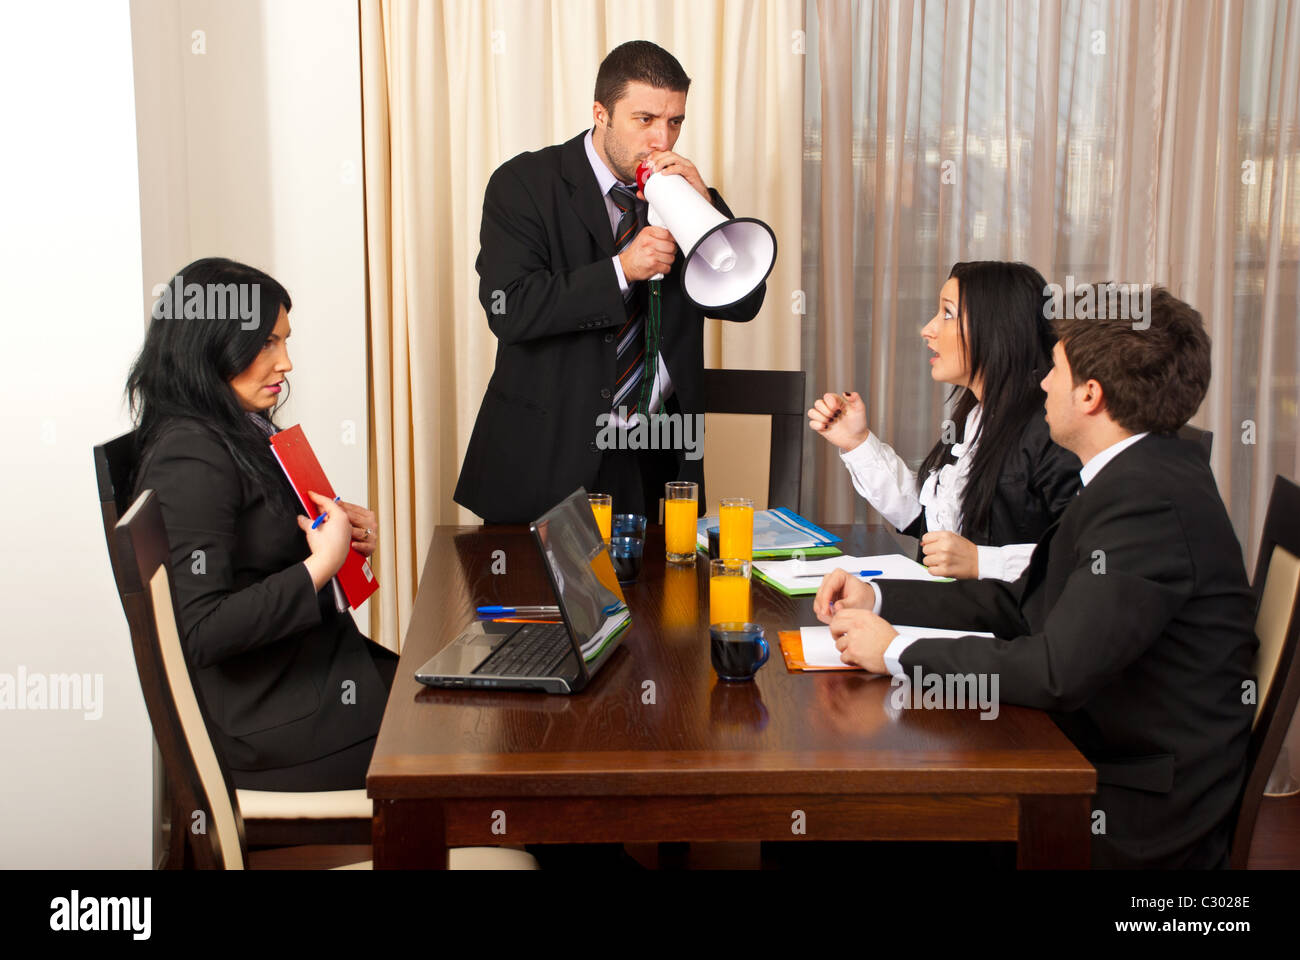 Furious chief shouting in megaphone to his employees at meeting Stock Photo